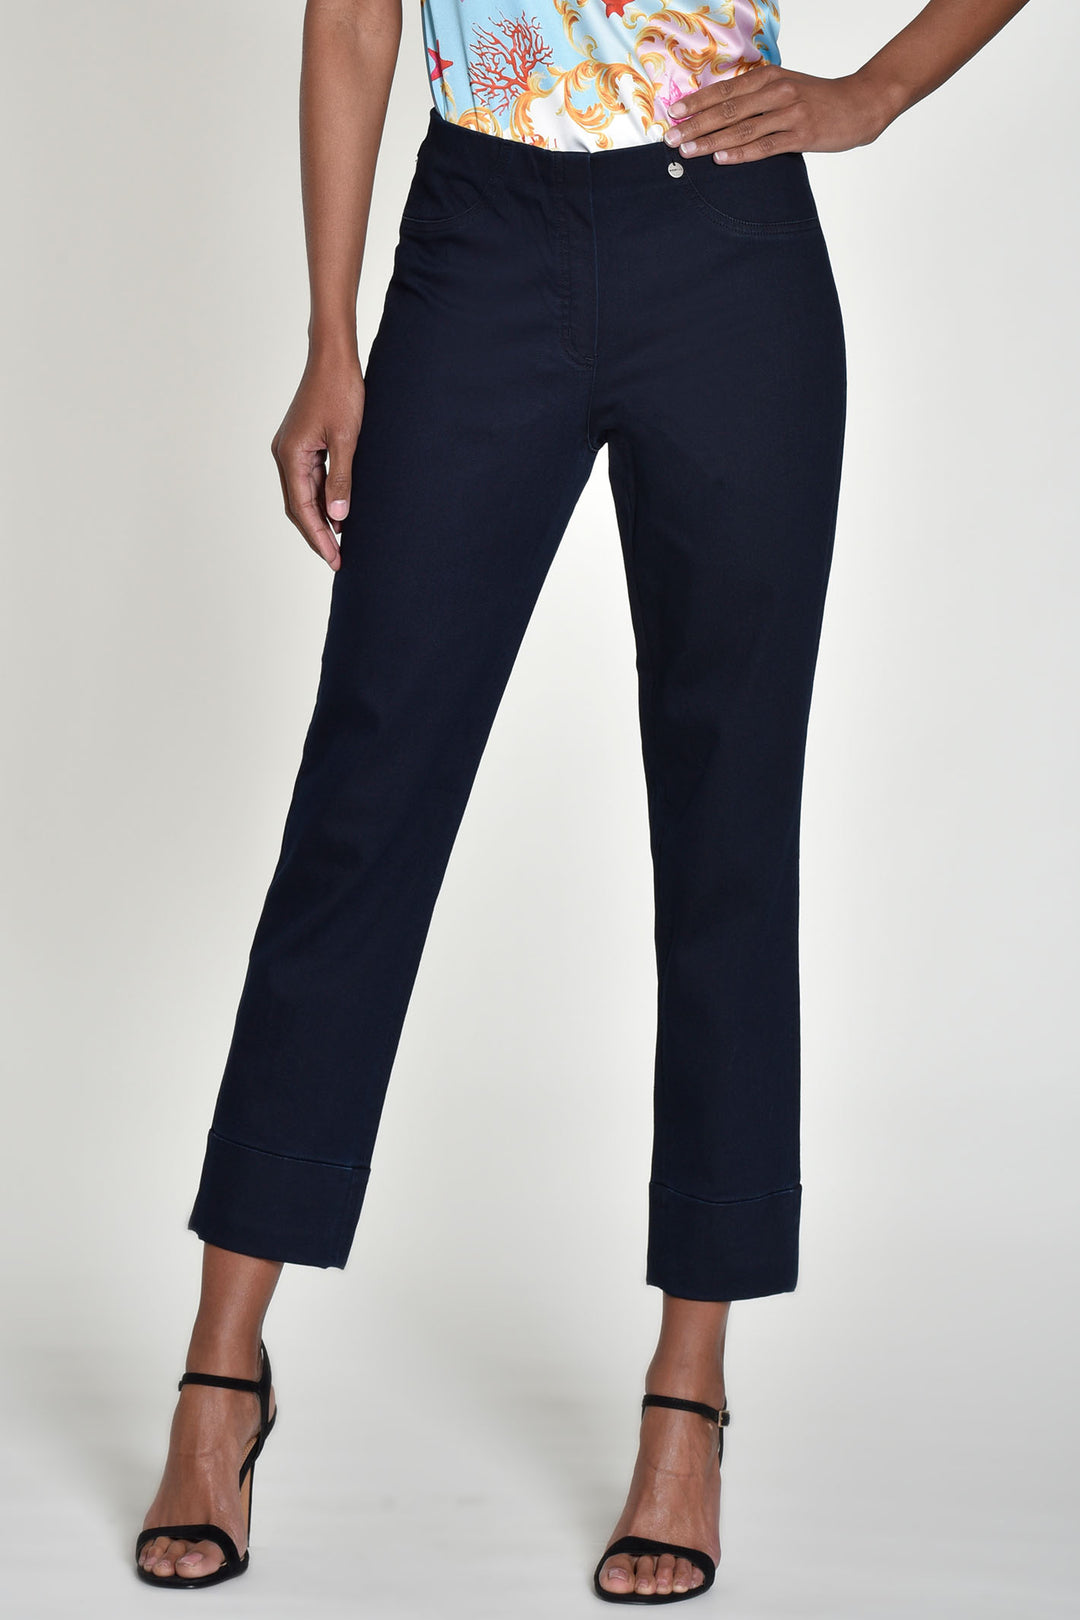 Robell 51628 5448 69 Bella 09 Navy Denim Trousers 68cm - Experience Boutique